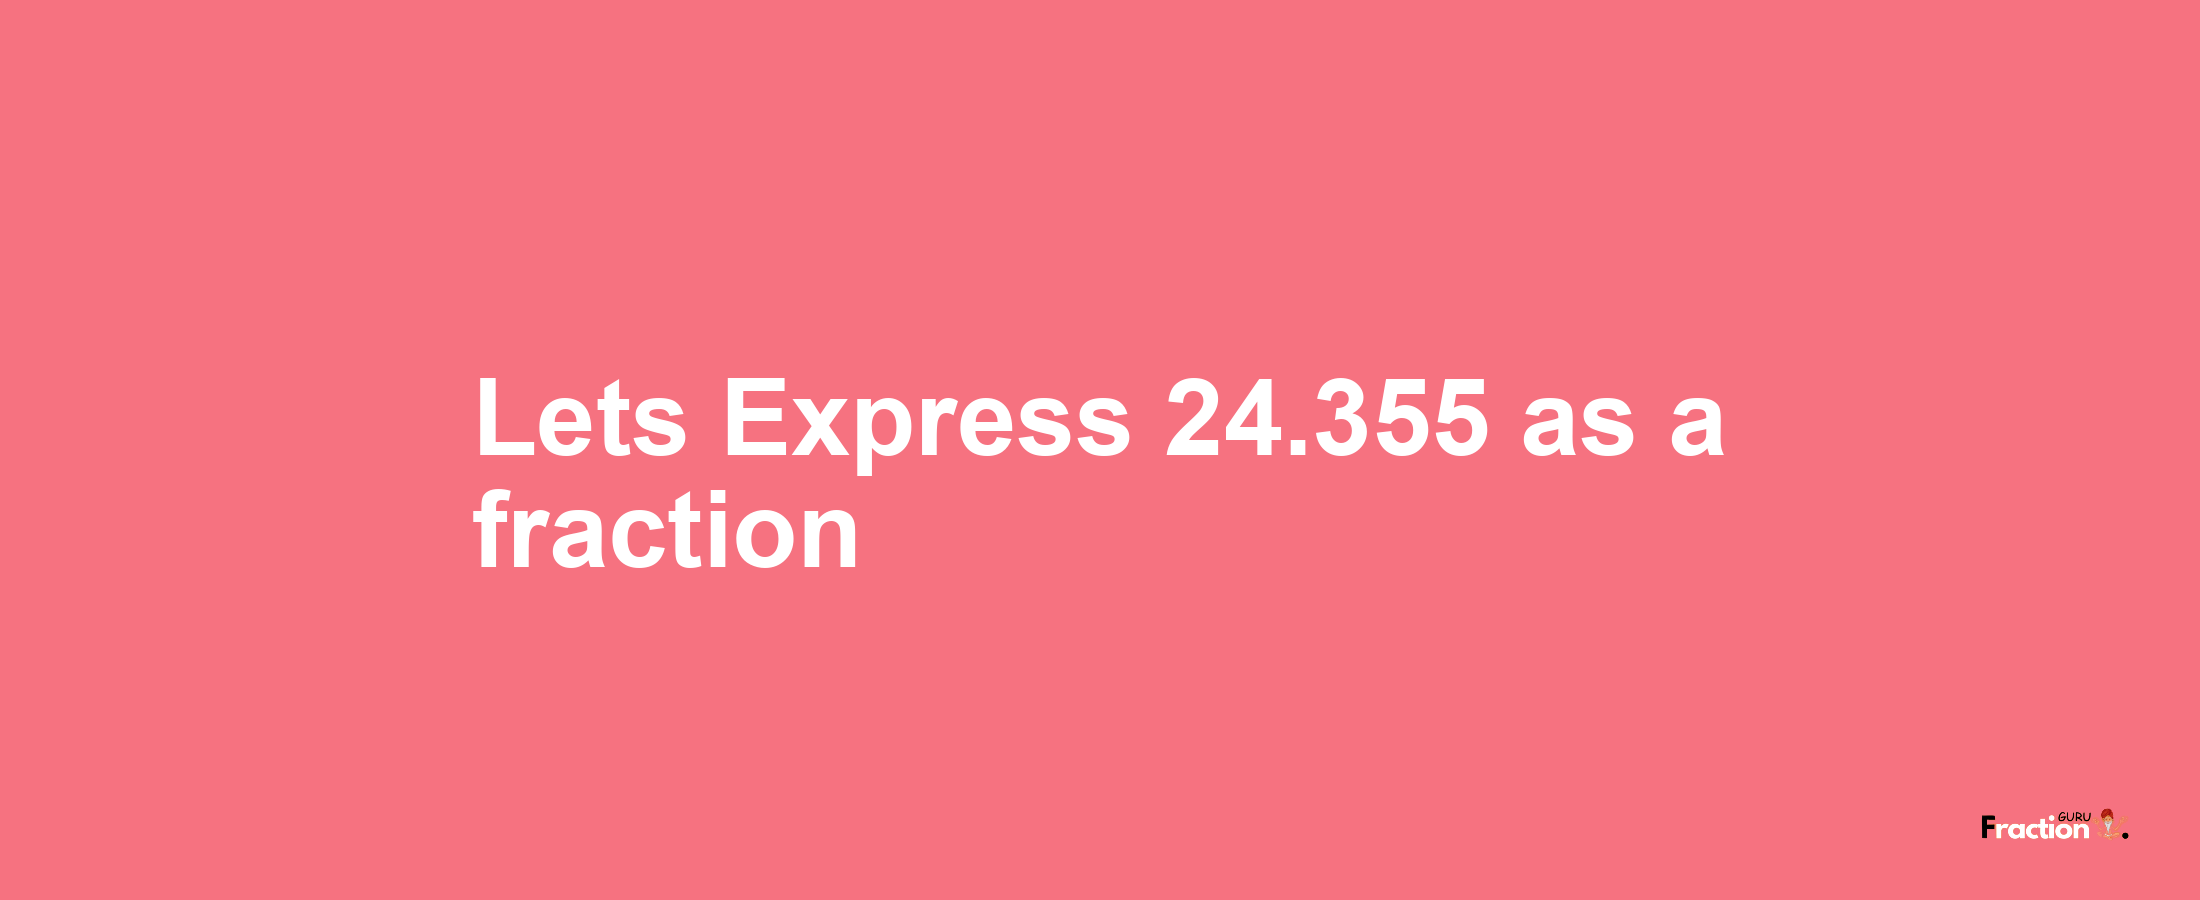 Lets Express 24.355 as afraction